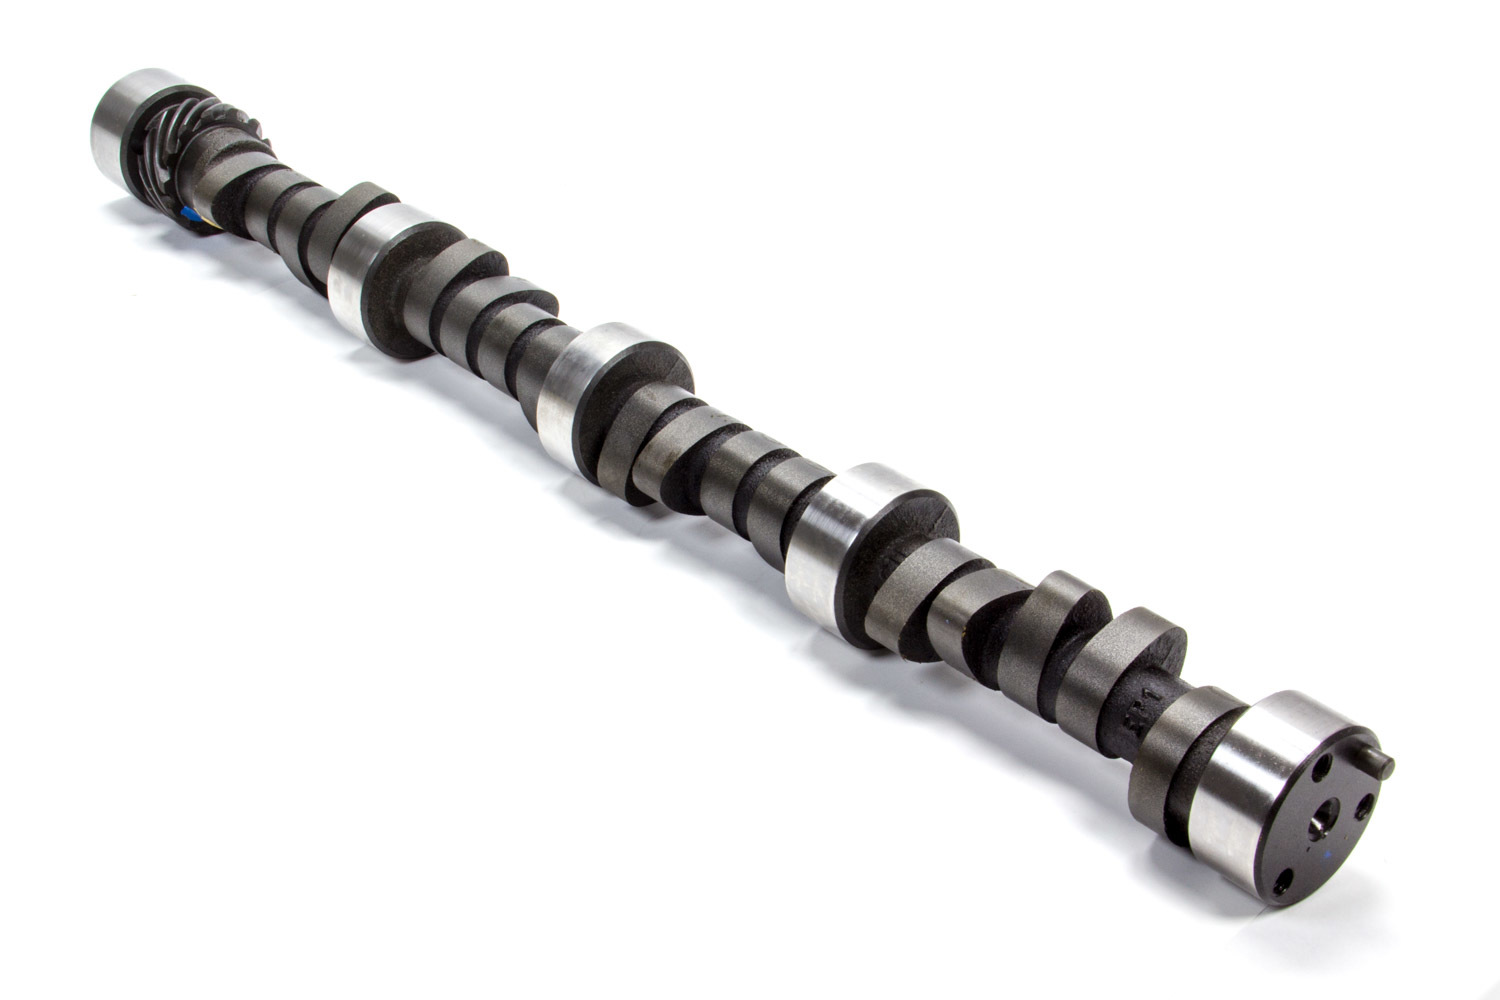 Elgin E-1091-P Camshaft, Oval Track, Mechanical Flat Tappet, Lift 0.504 / 0.504 in, Duration 287 / 295, 111 LSA, 3200 / 6500 RPM, Small Block Chevy, Each